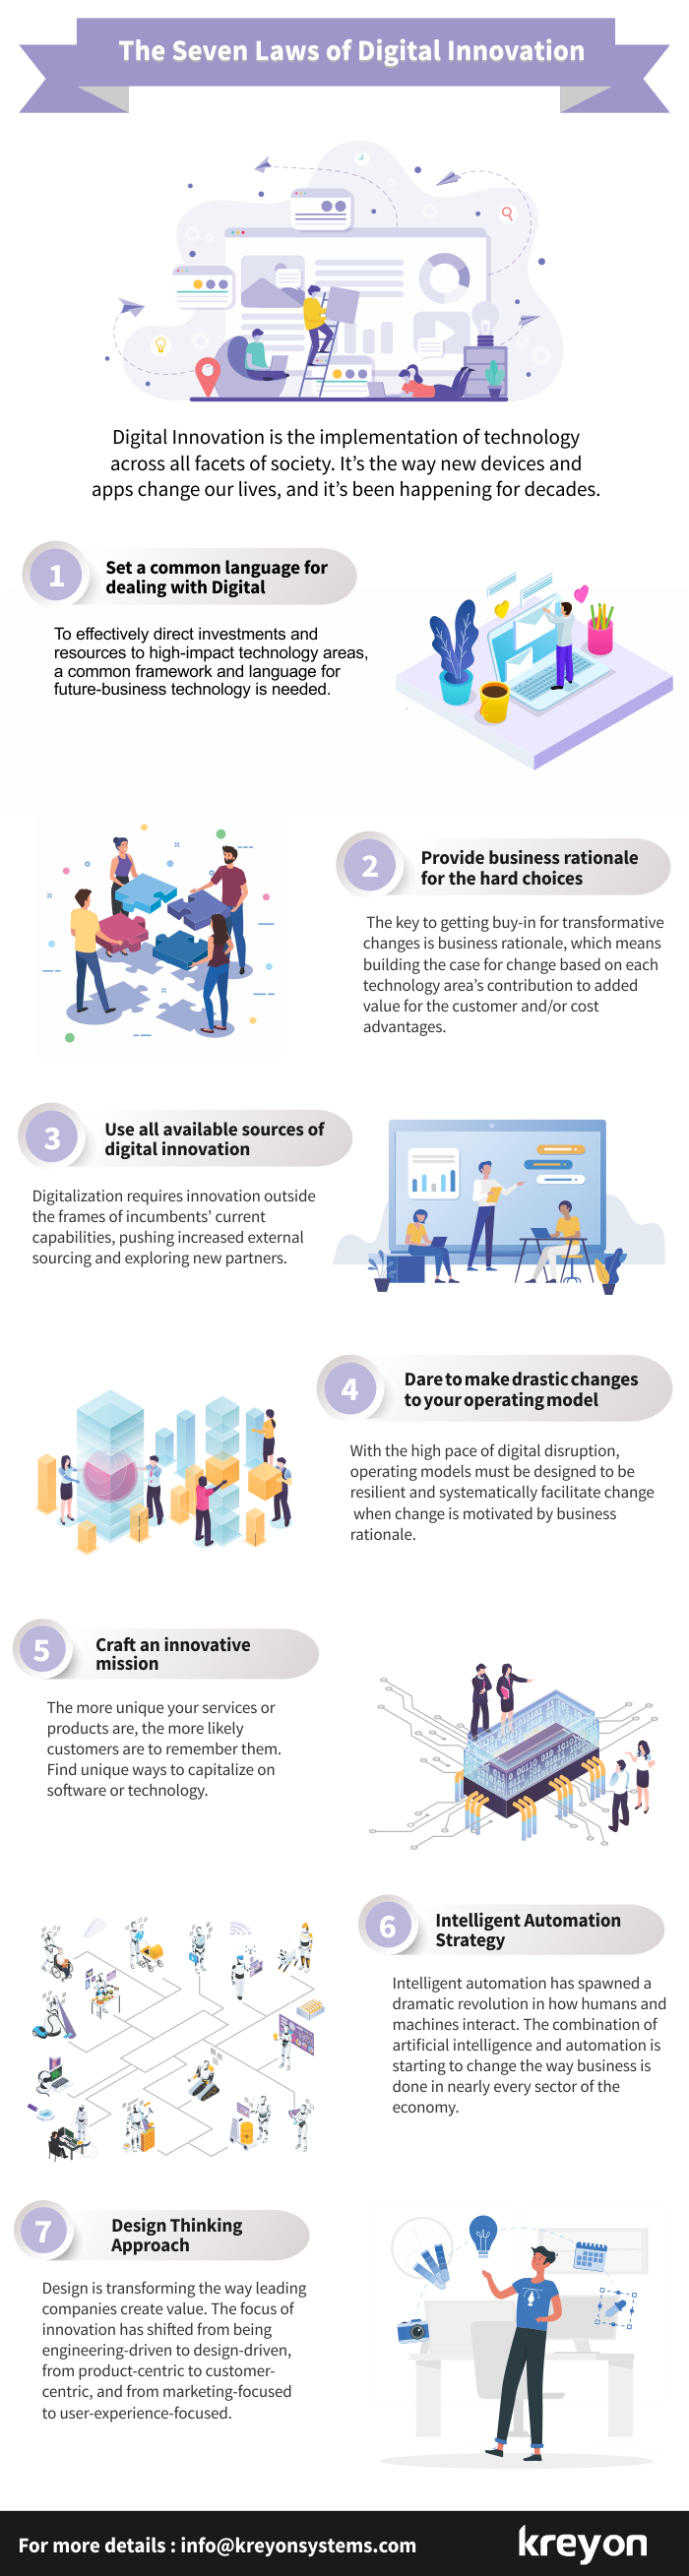 The Seven Laws of Digital Innovation